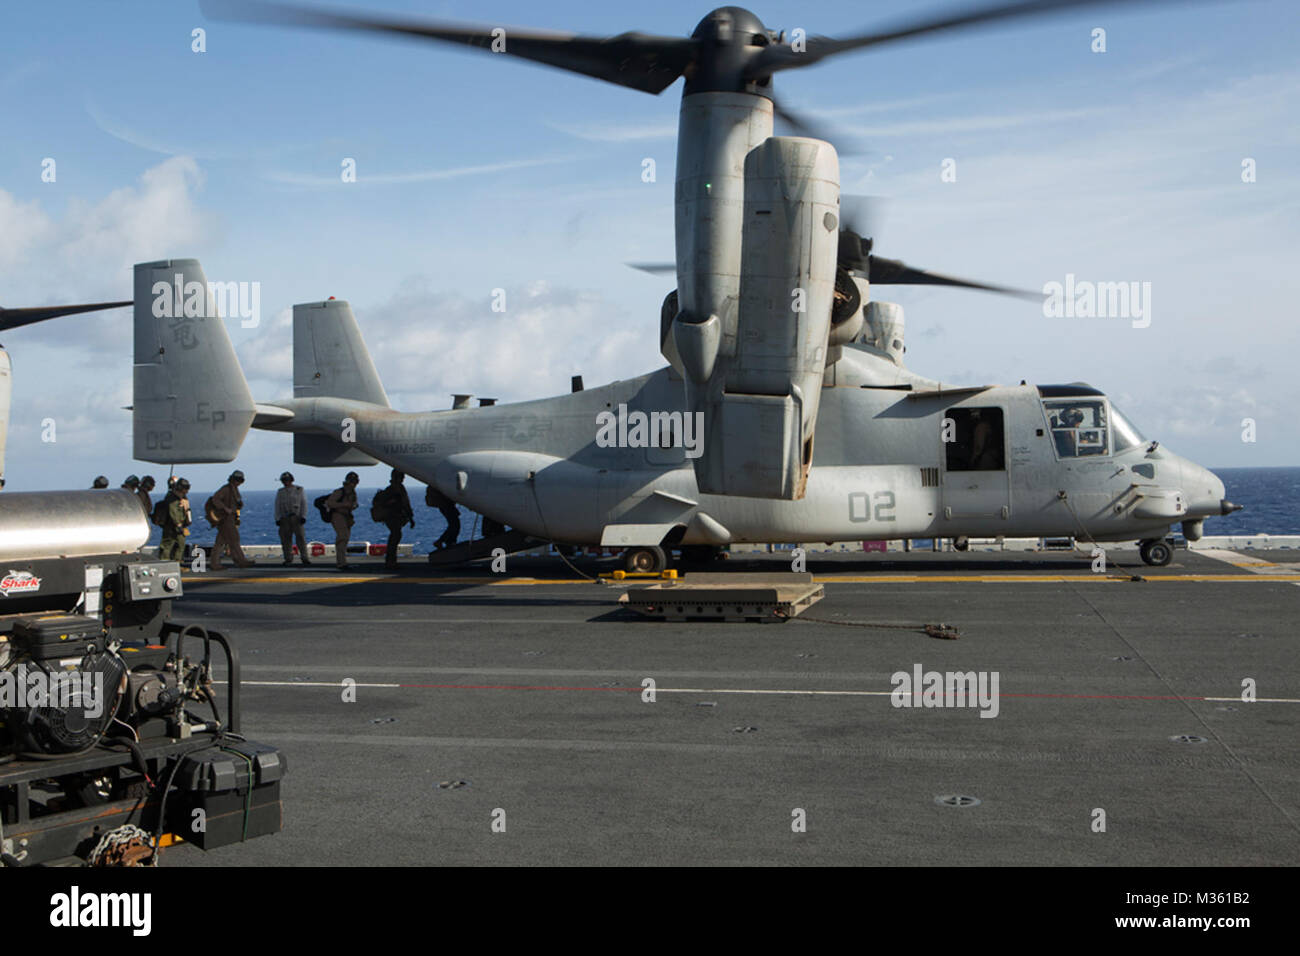 U.S. Marines and sailors with the 31st Marine Expeditionary Unit load into an MV-22B Osprey aboard the USS Bonhomme Richard (LHD 6), Aug. 8, 2015. The 31st MEU is staging Ospreys in Guam in support of typhoon recovery efforts in Saipan. The aircraft will be on standby in the event their aerial lift capacity is needed to distribute emergency supplies to remote areas. Saipan, the most populated island in the Commonwealth of the Northern Mariana Islands, was struck by Typhoon Soudelor Aug. 2-3.  (U.S. Marine Corps photo by Cpl. Tyler Ngiraswei/ Released) Marines Assist Saipan During Typhoon Recov Stock Photo